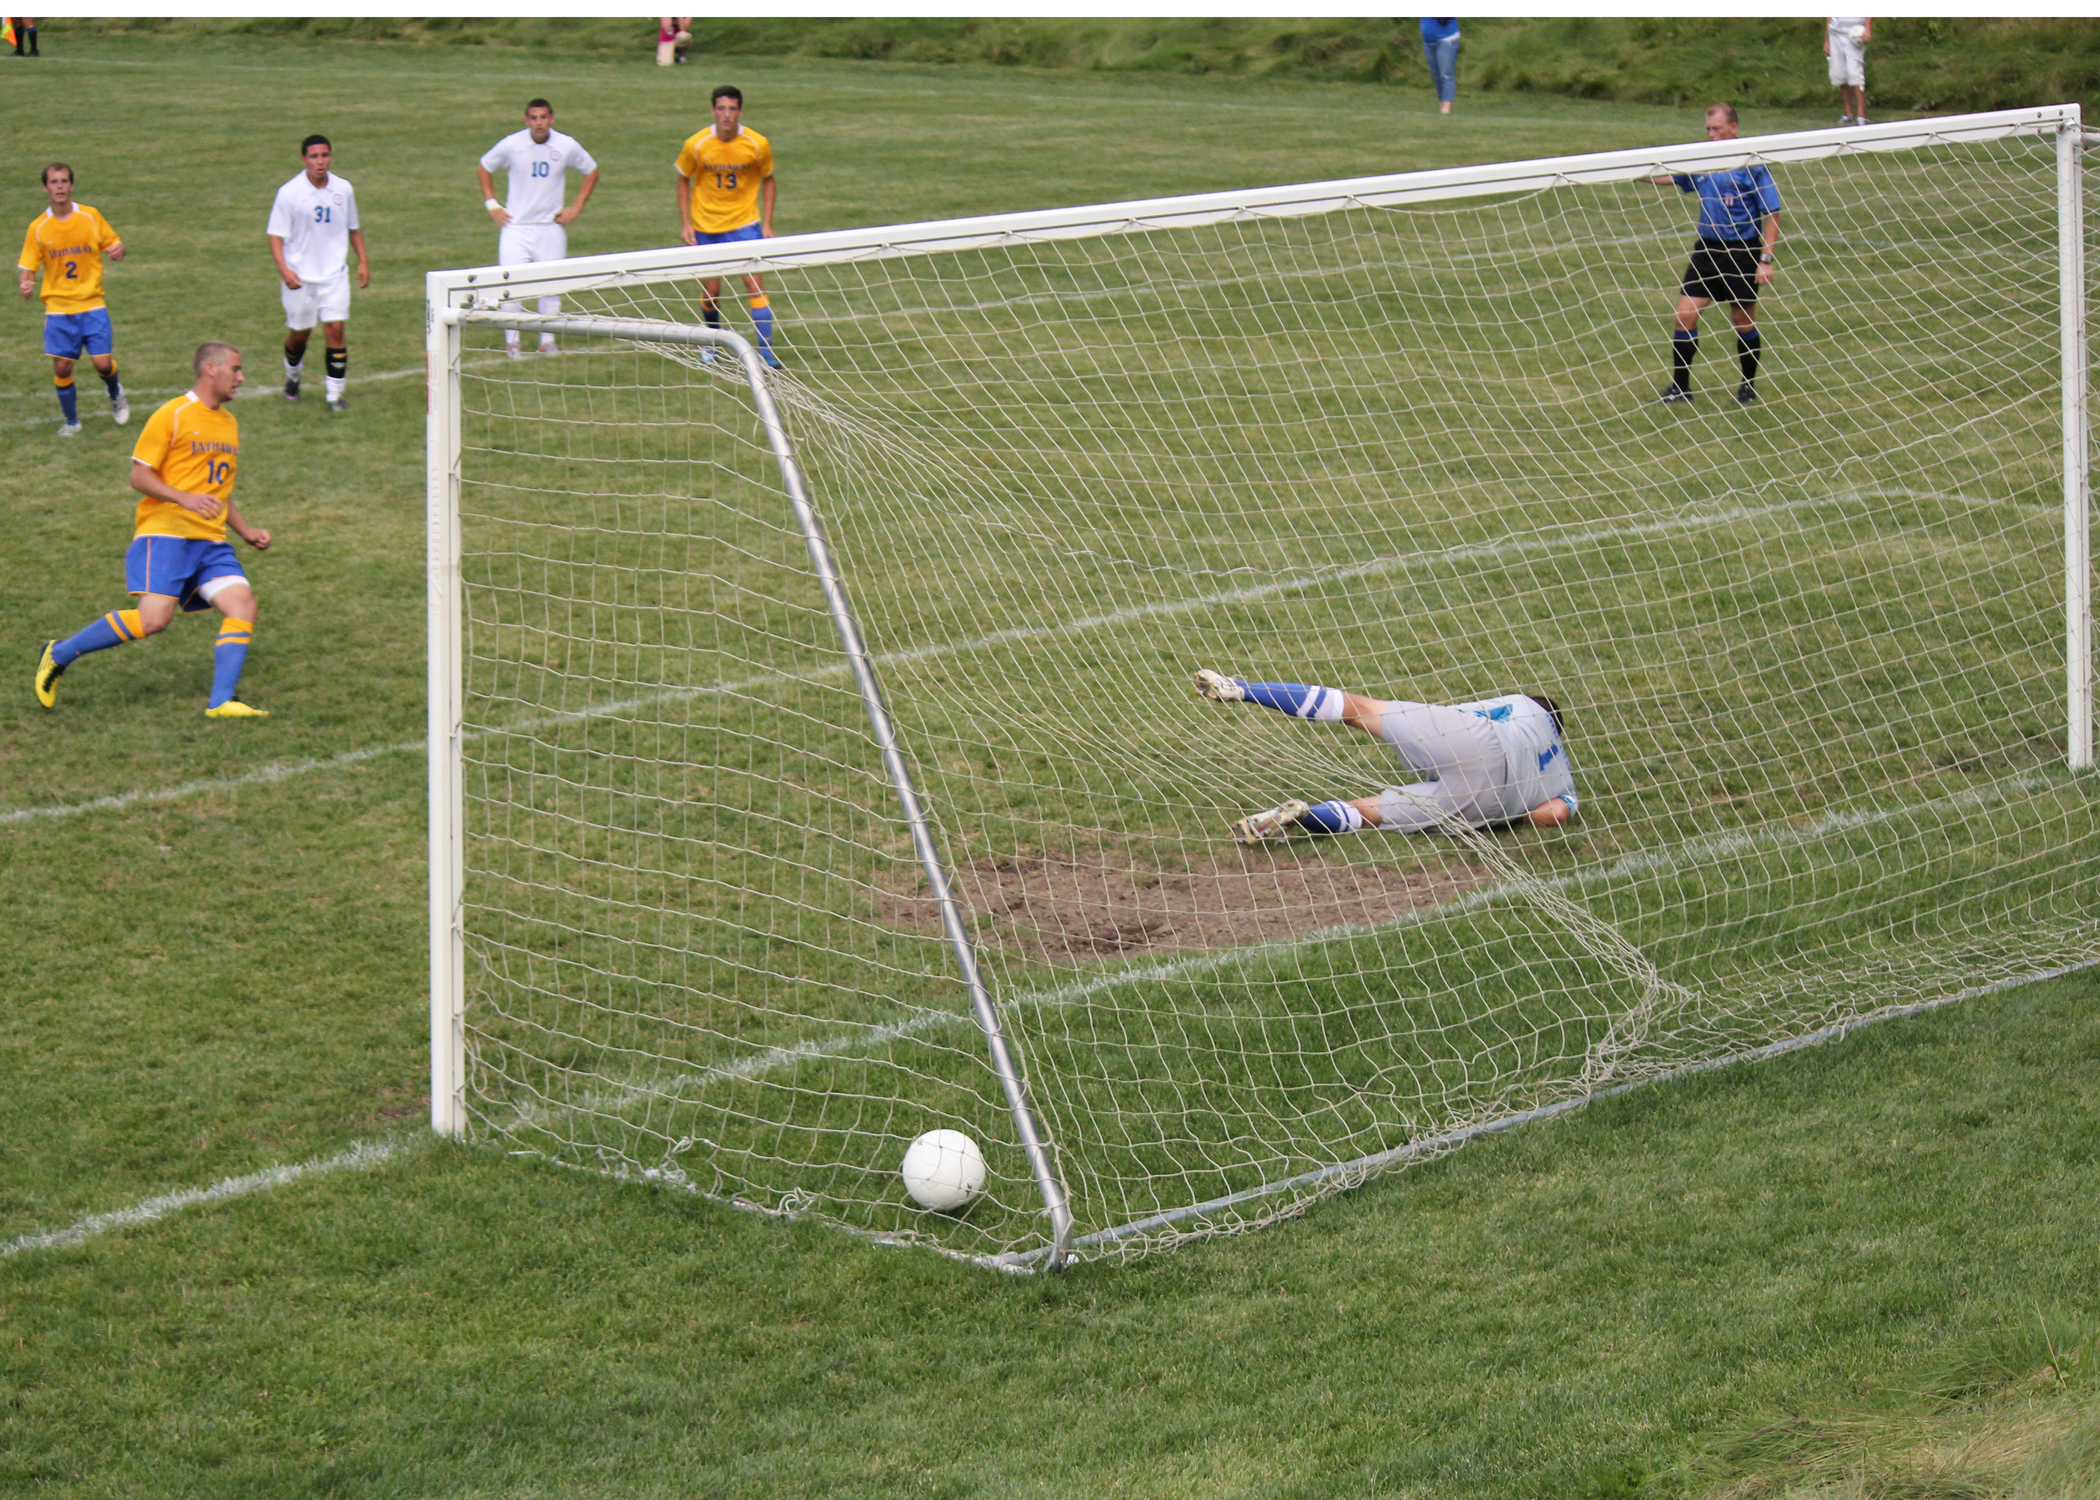 Nathan Schmitt scores one of his three goals on a penalty kick against Ancilla College.